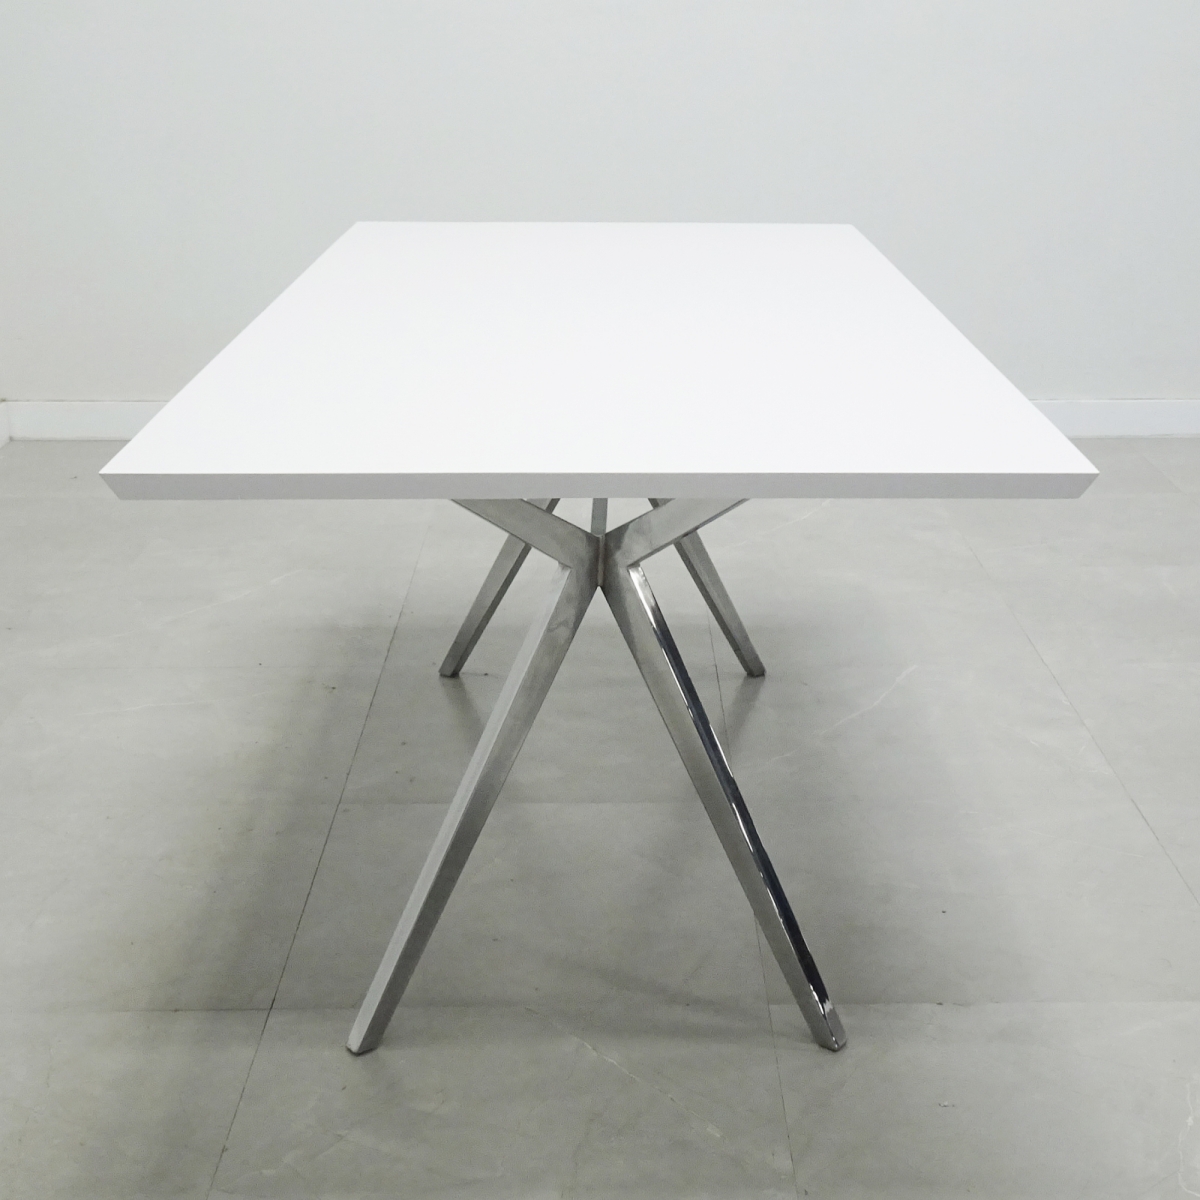 72 In. Axis Rectangular Conference Table - Stock #404